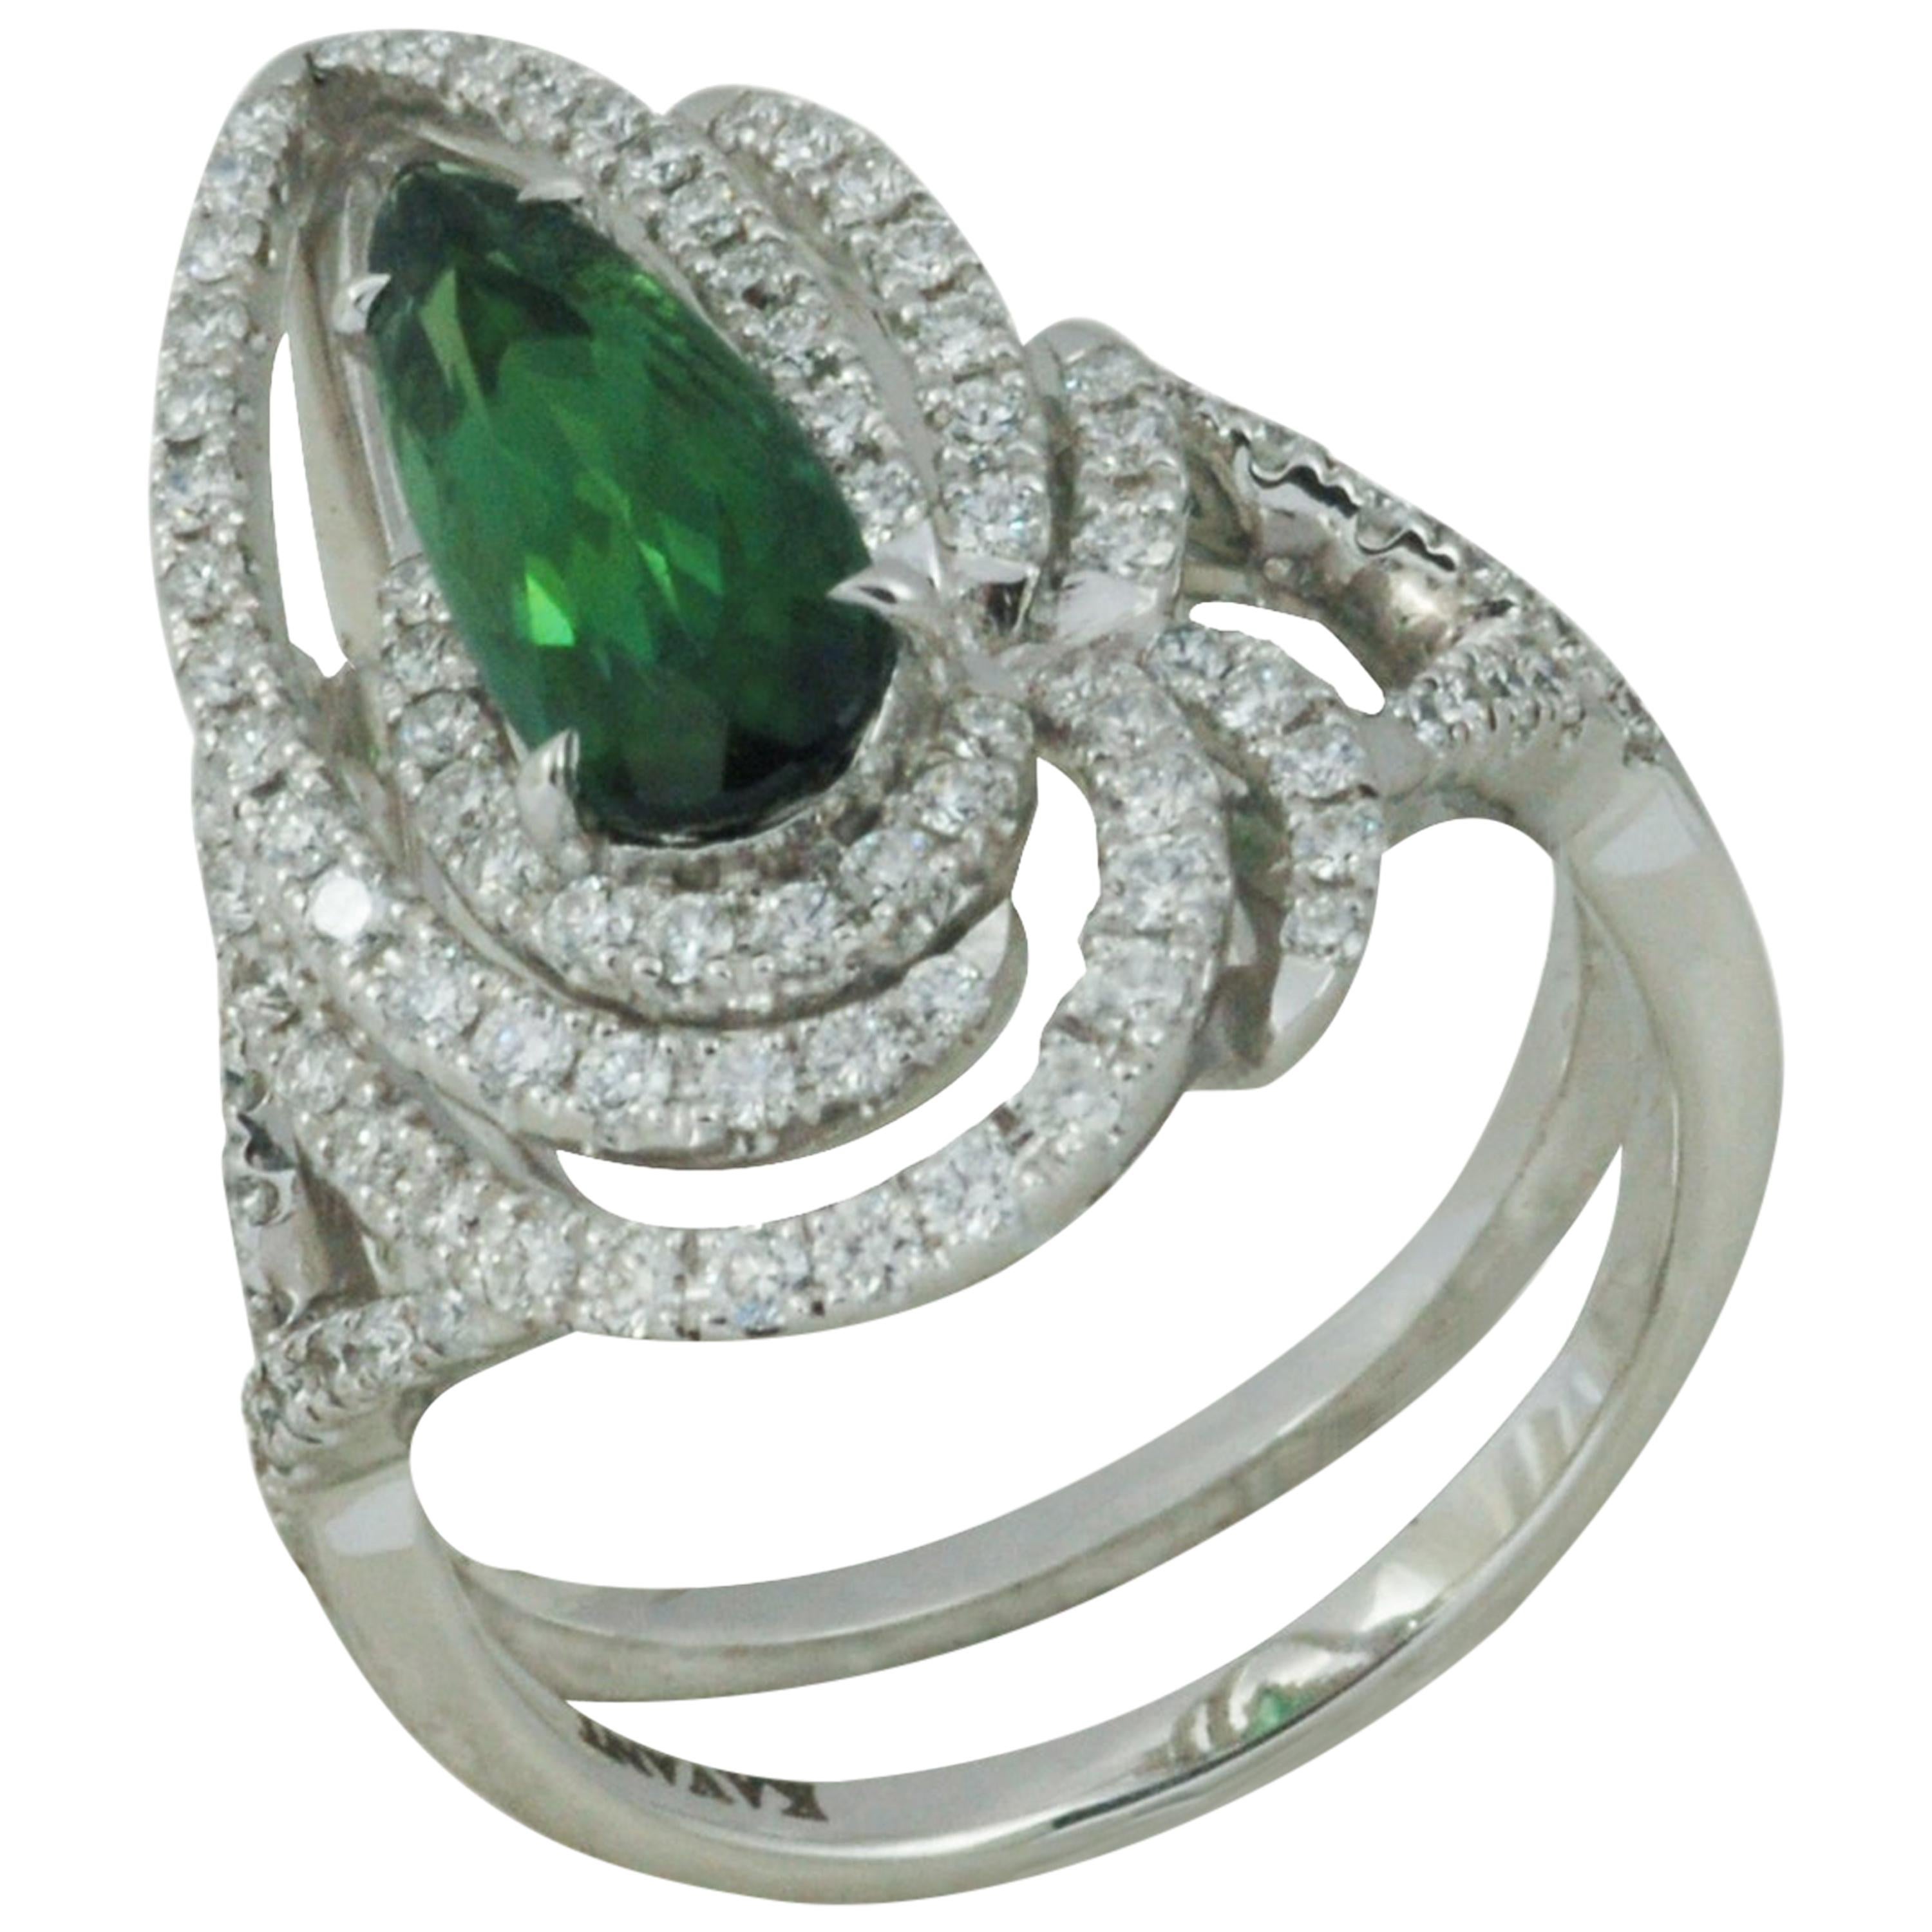 Green Tourmaline 1.45 Carat with Diamond 0.62 Ct Ring in 18k White Gold Settings For Sale